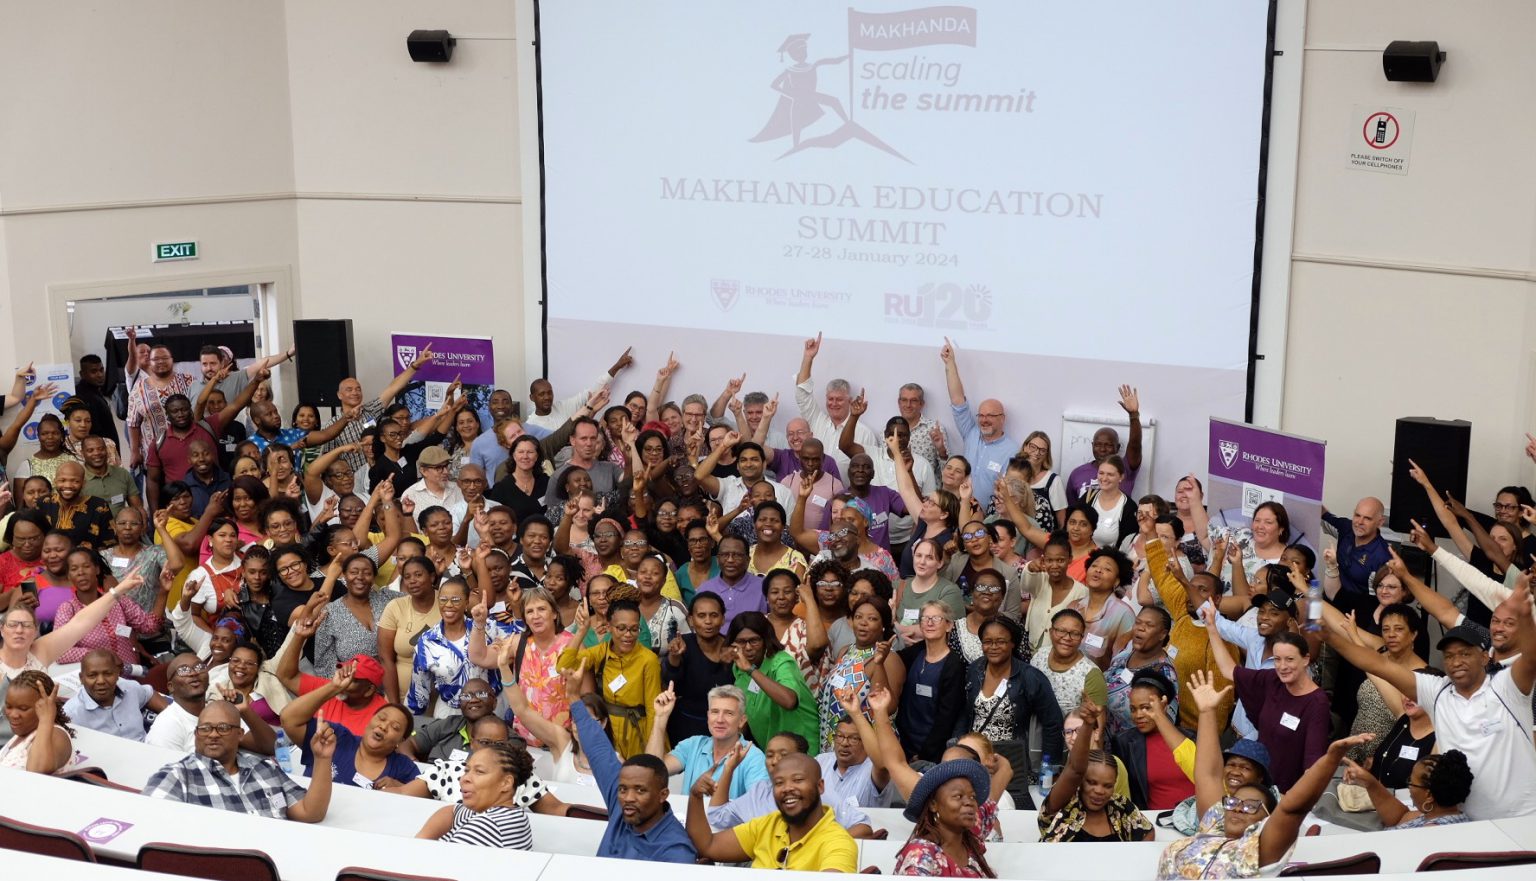 Delegates to the Makhanda Education Summit aim for the summit of South Africa’s education landscape.